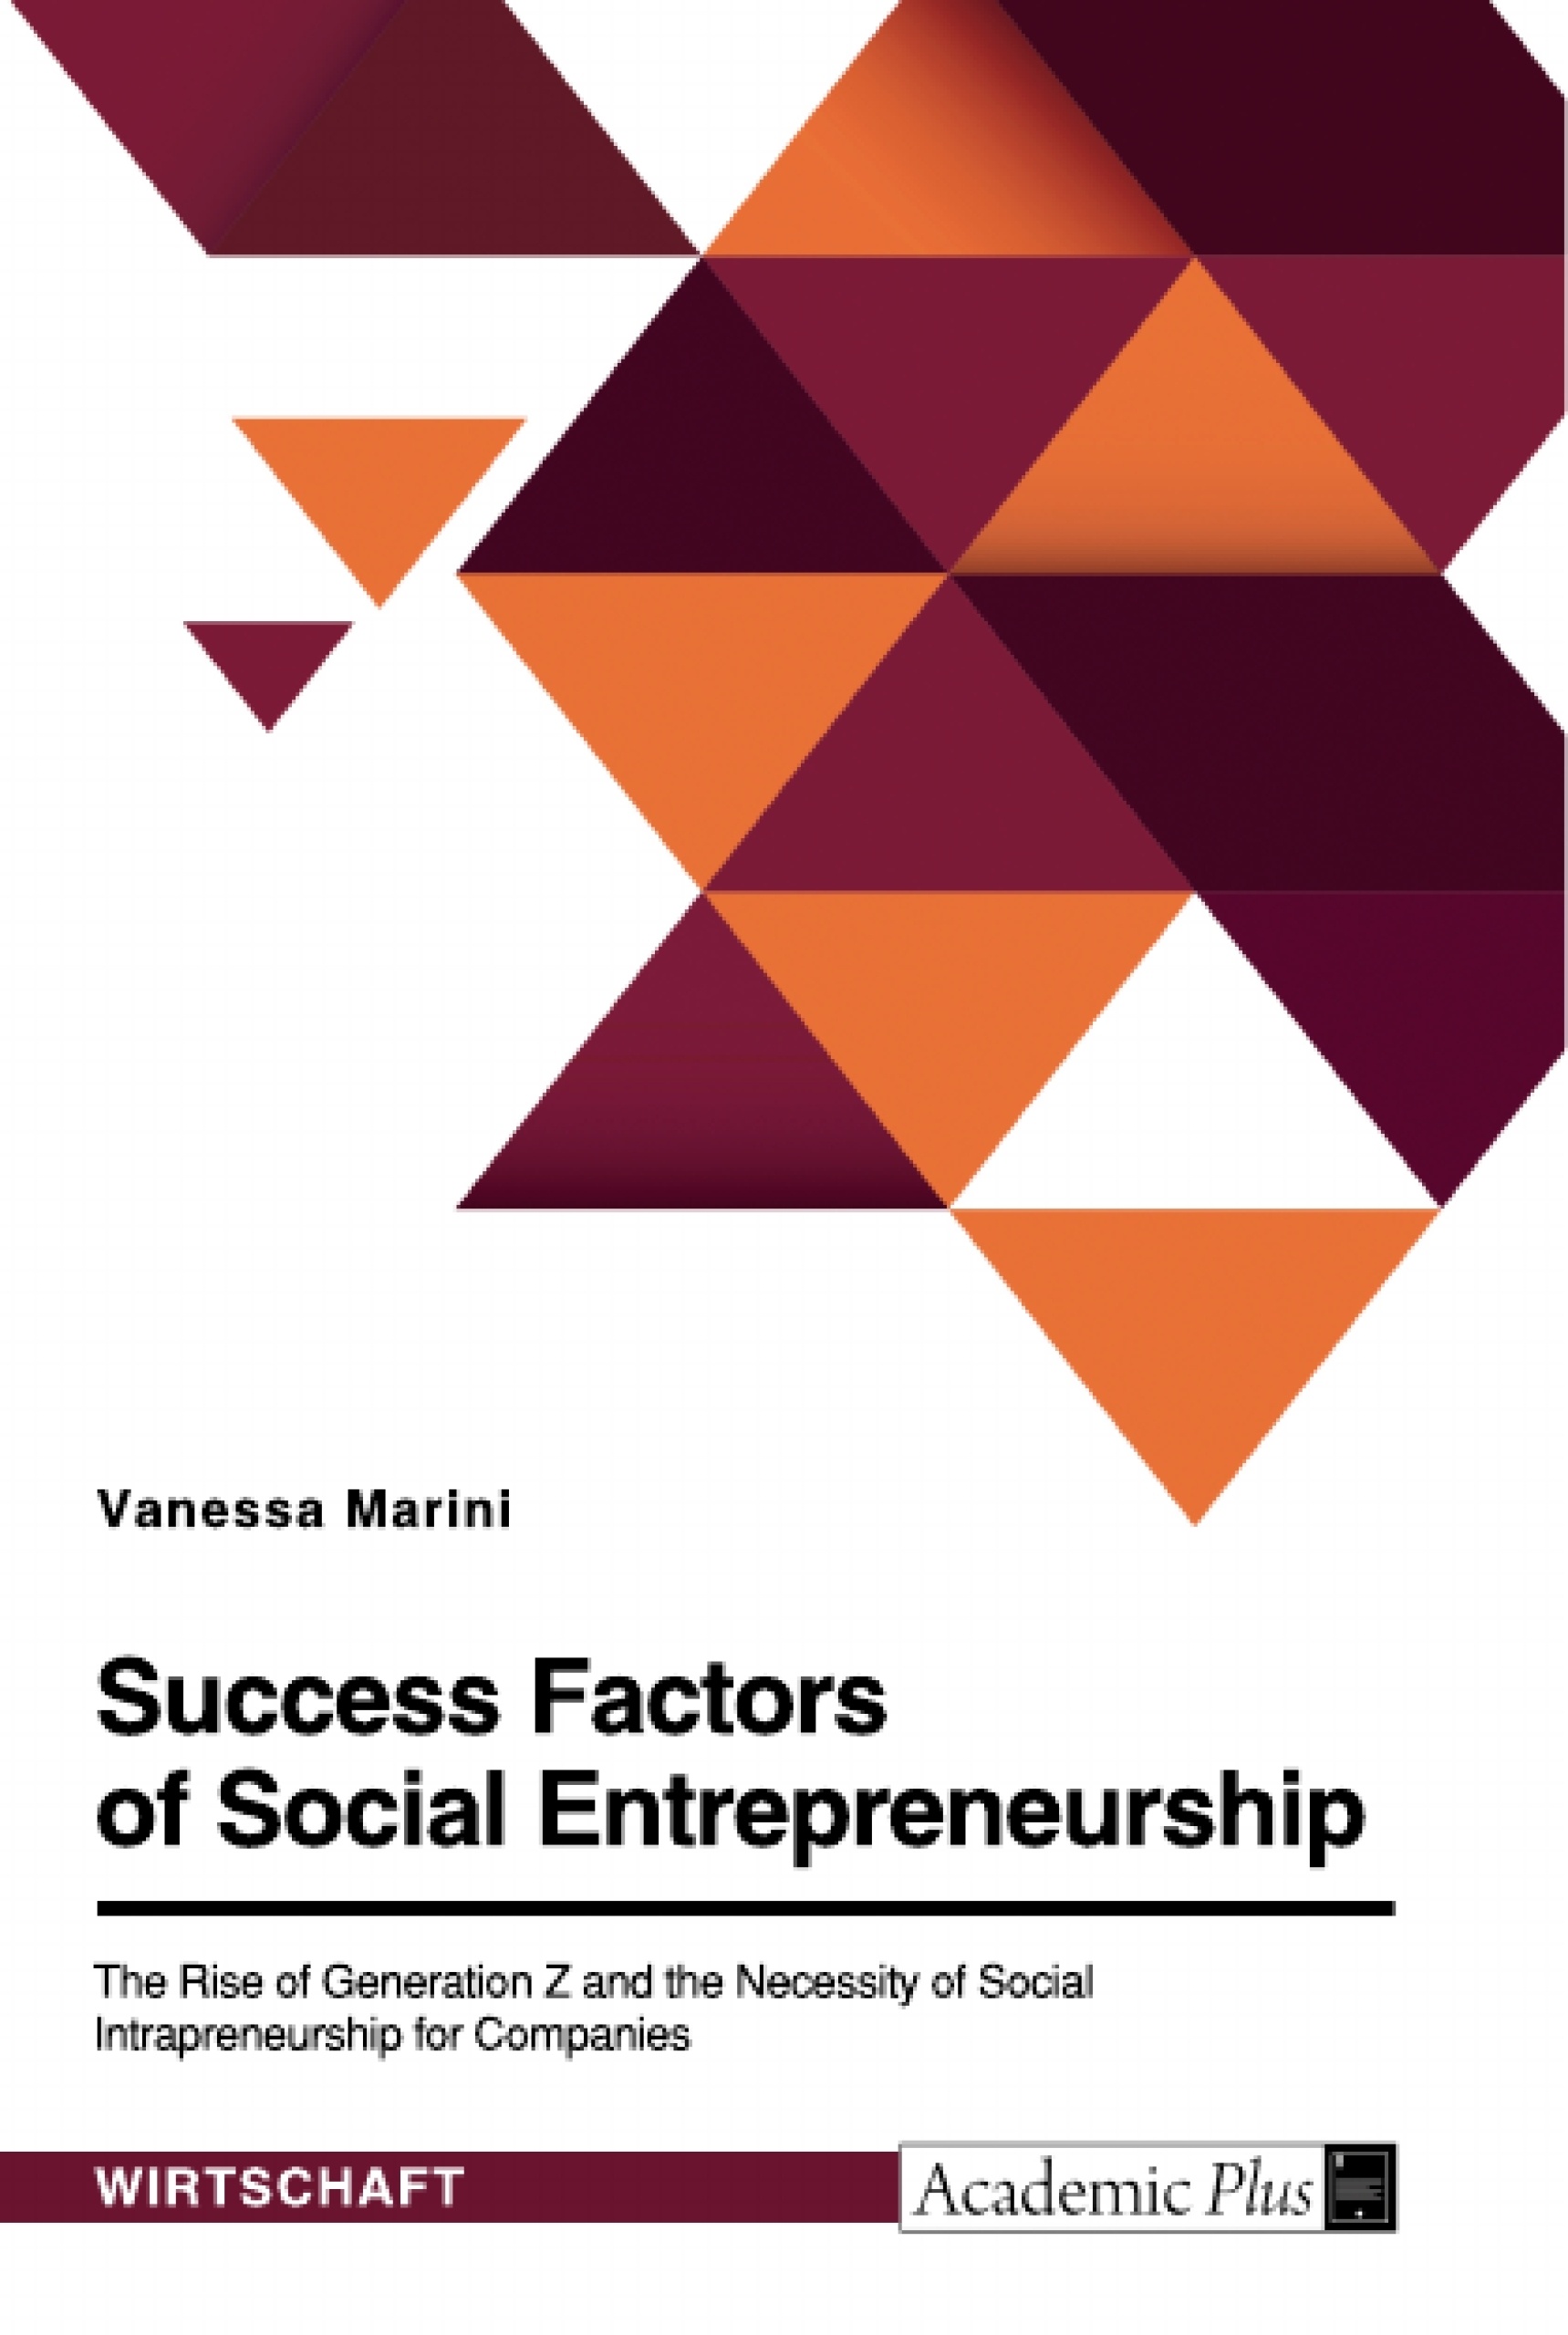 Title: Success Factors of Social Entrepreneurship. The Rise of Generation Z and the Necessity of Social Intrapreneurship for Companies